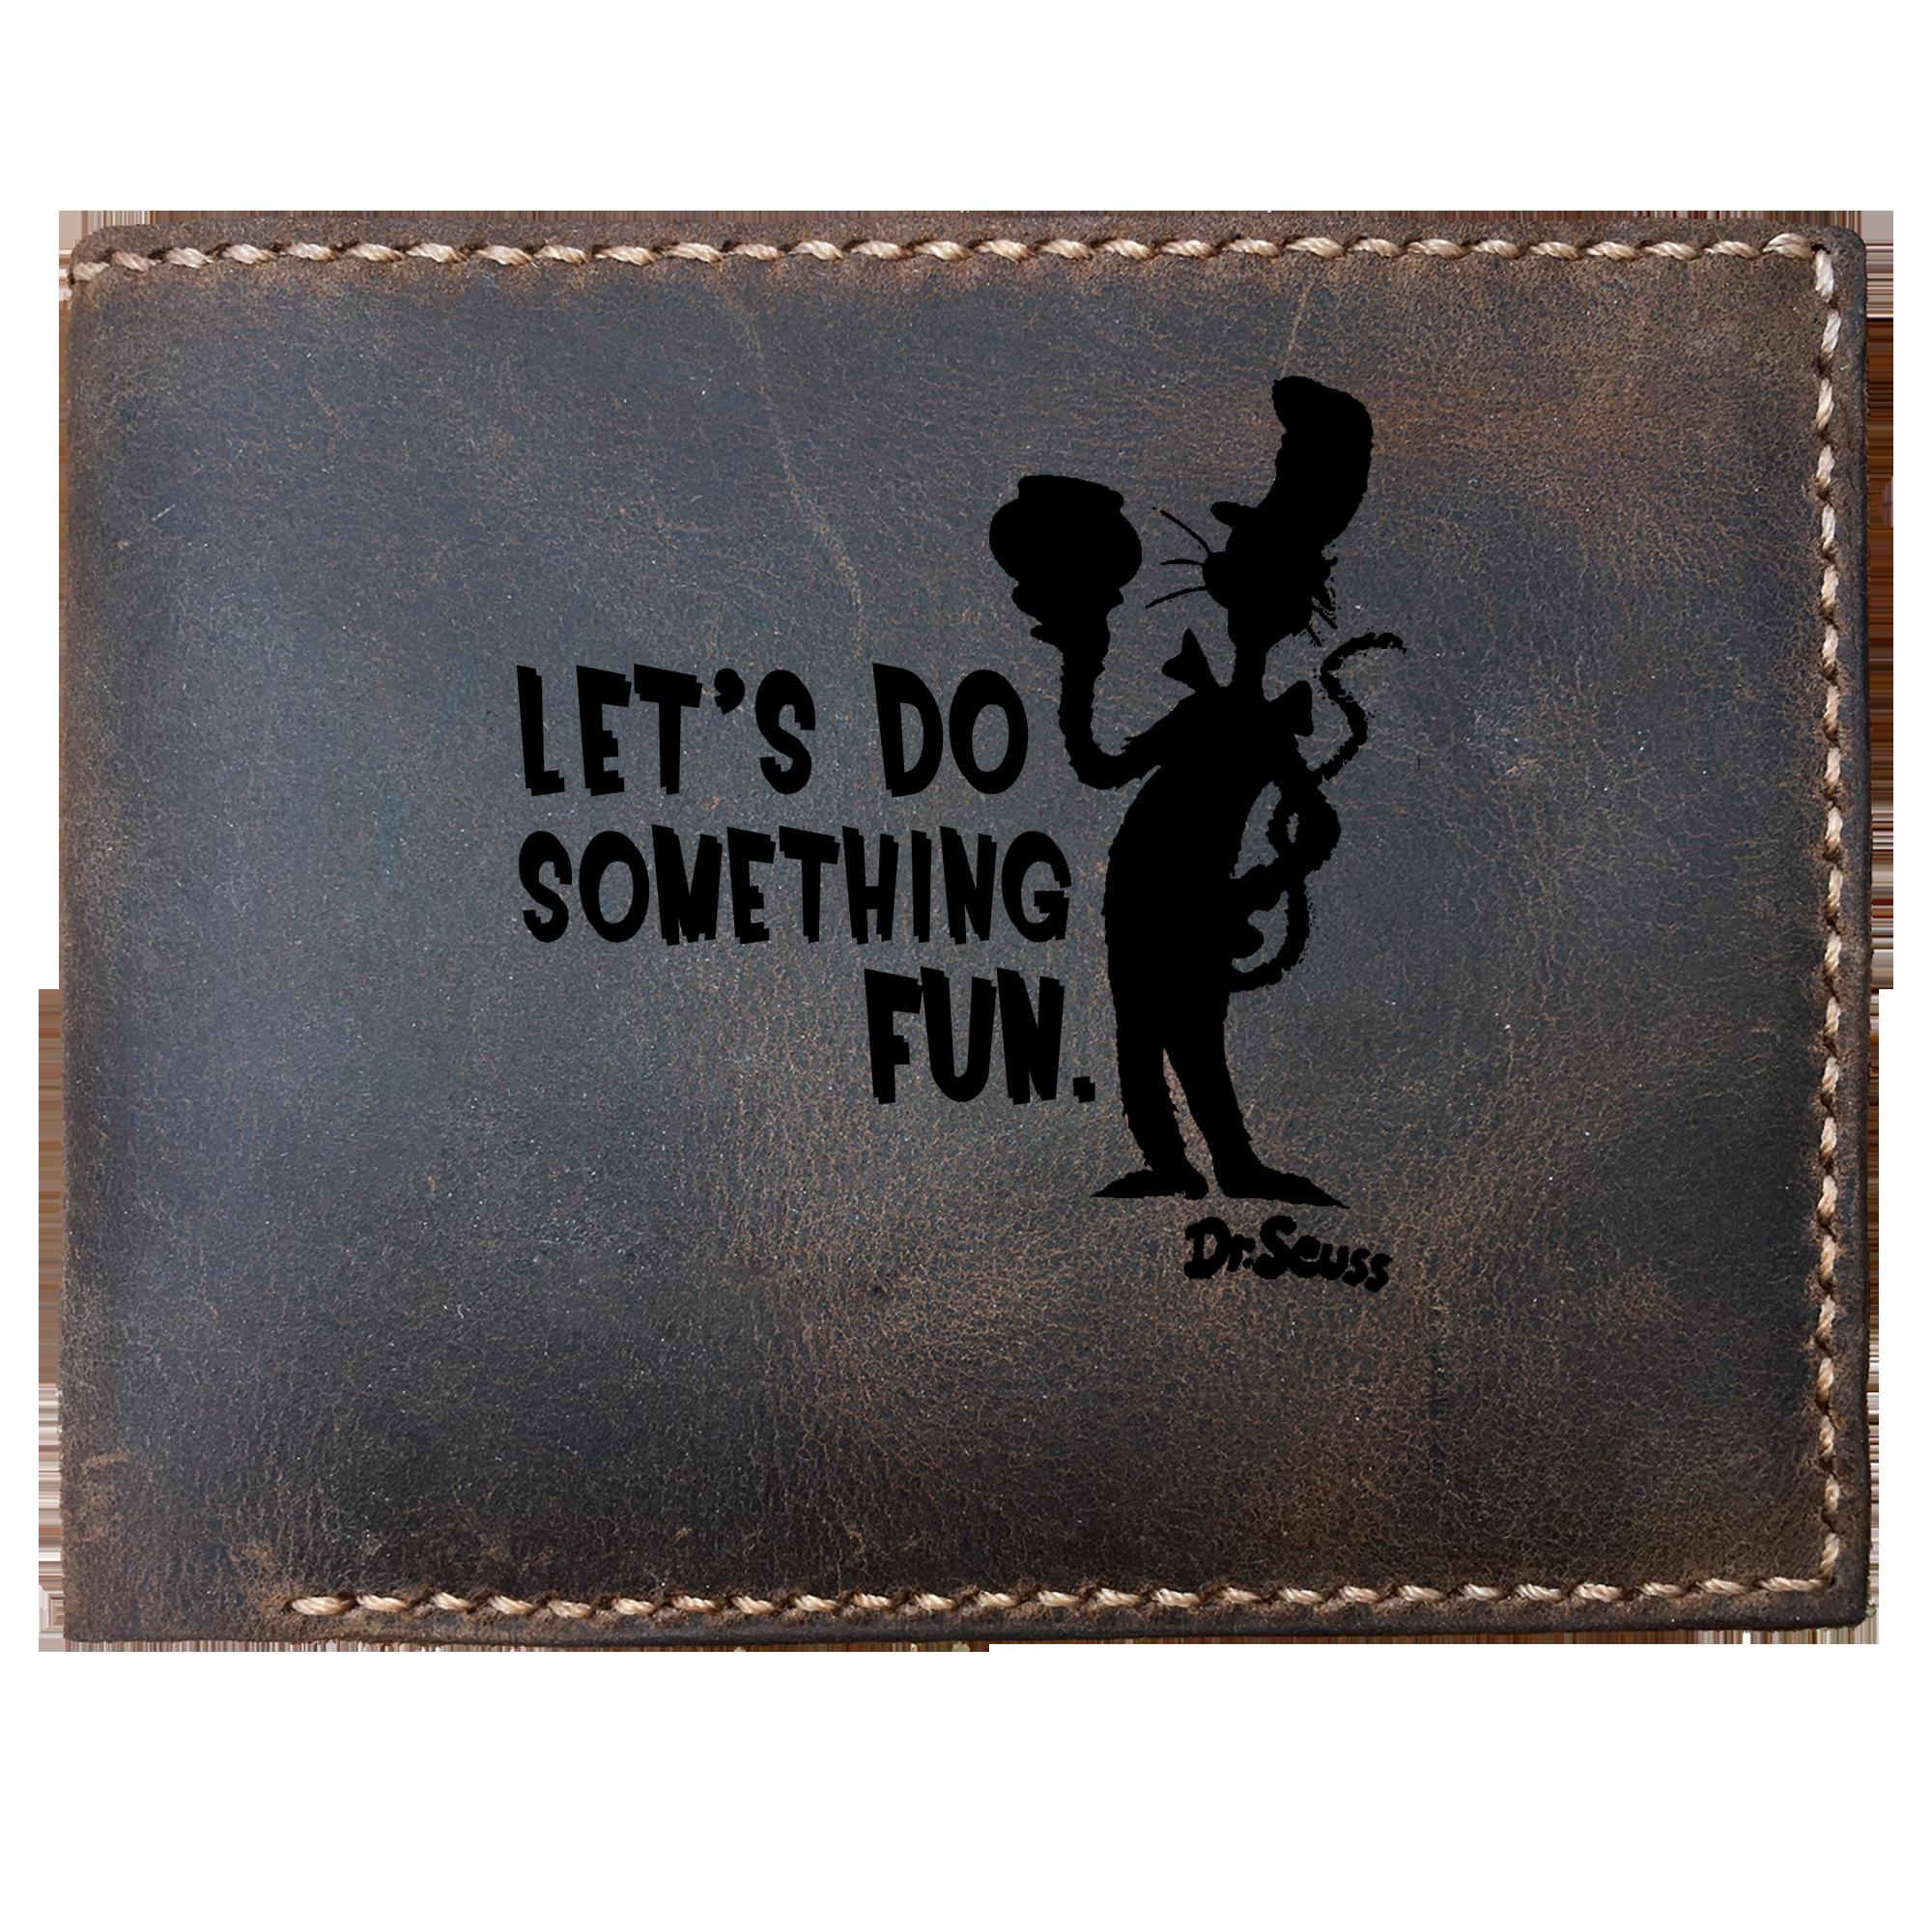 Skitongifts Funny Custom Laser Engraved Bifold Leather Wallet For Men, Lets Do Something Fun Dr. Seuss